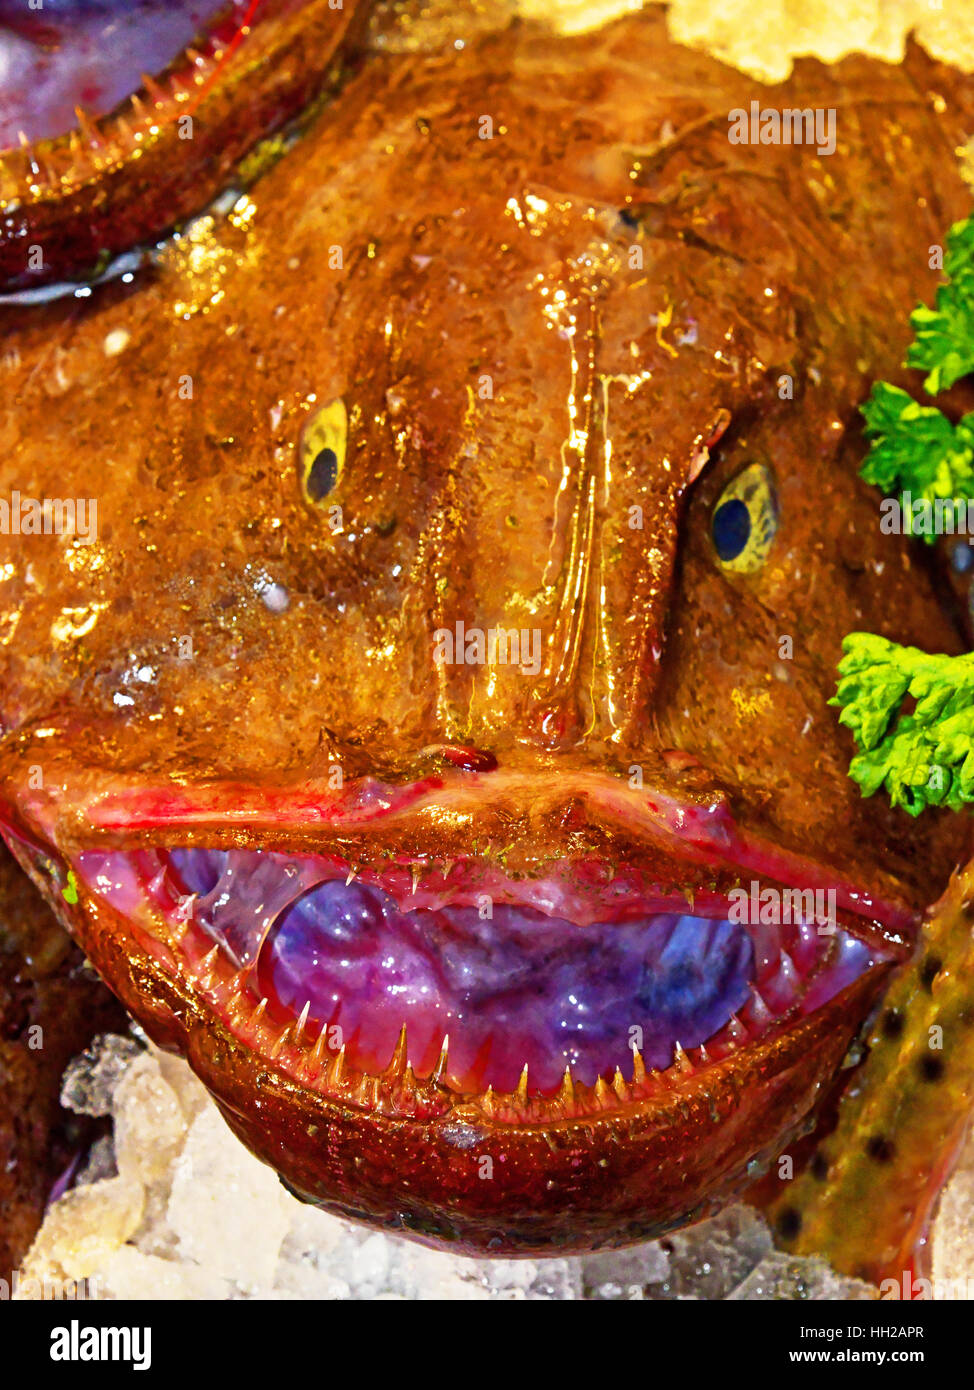 Gruesome sharp toothed Monkfish Stock Photo